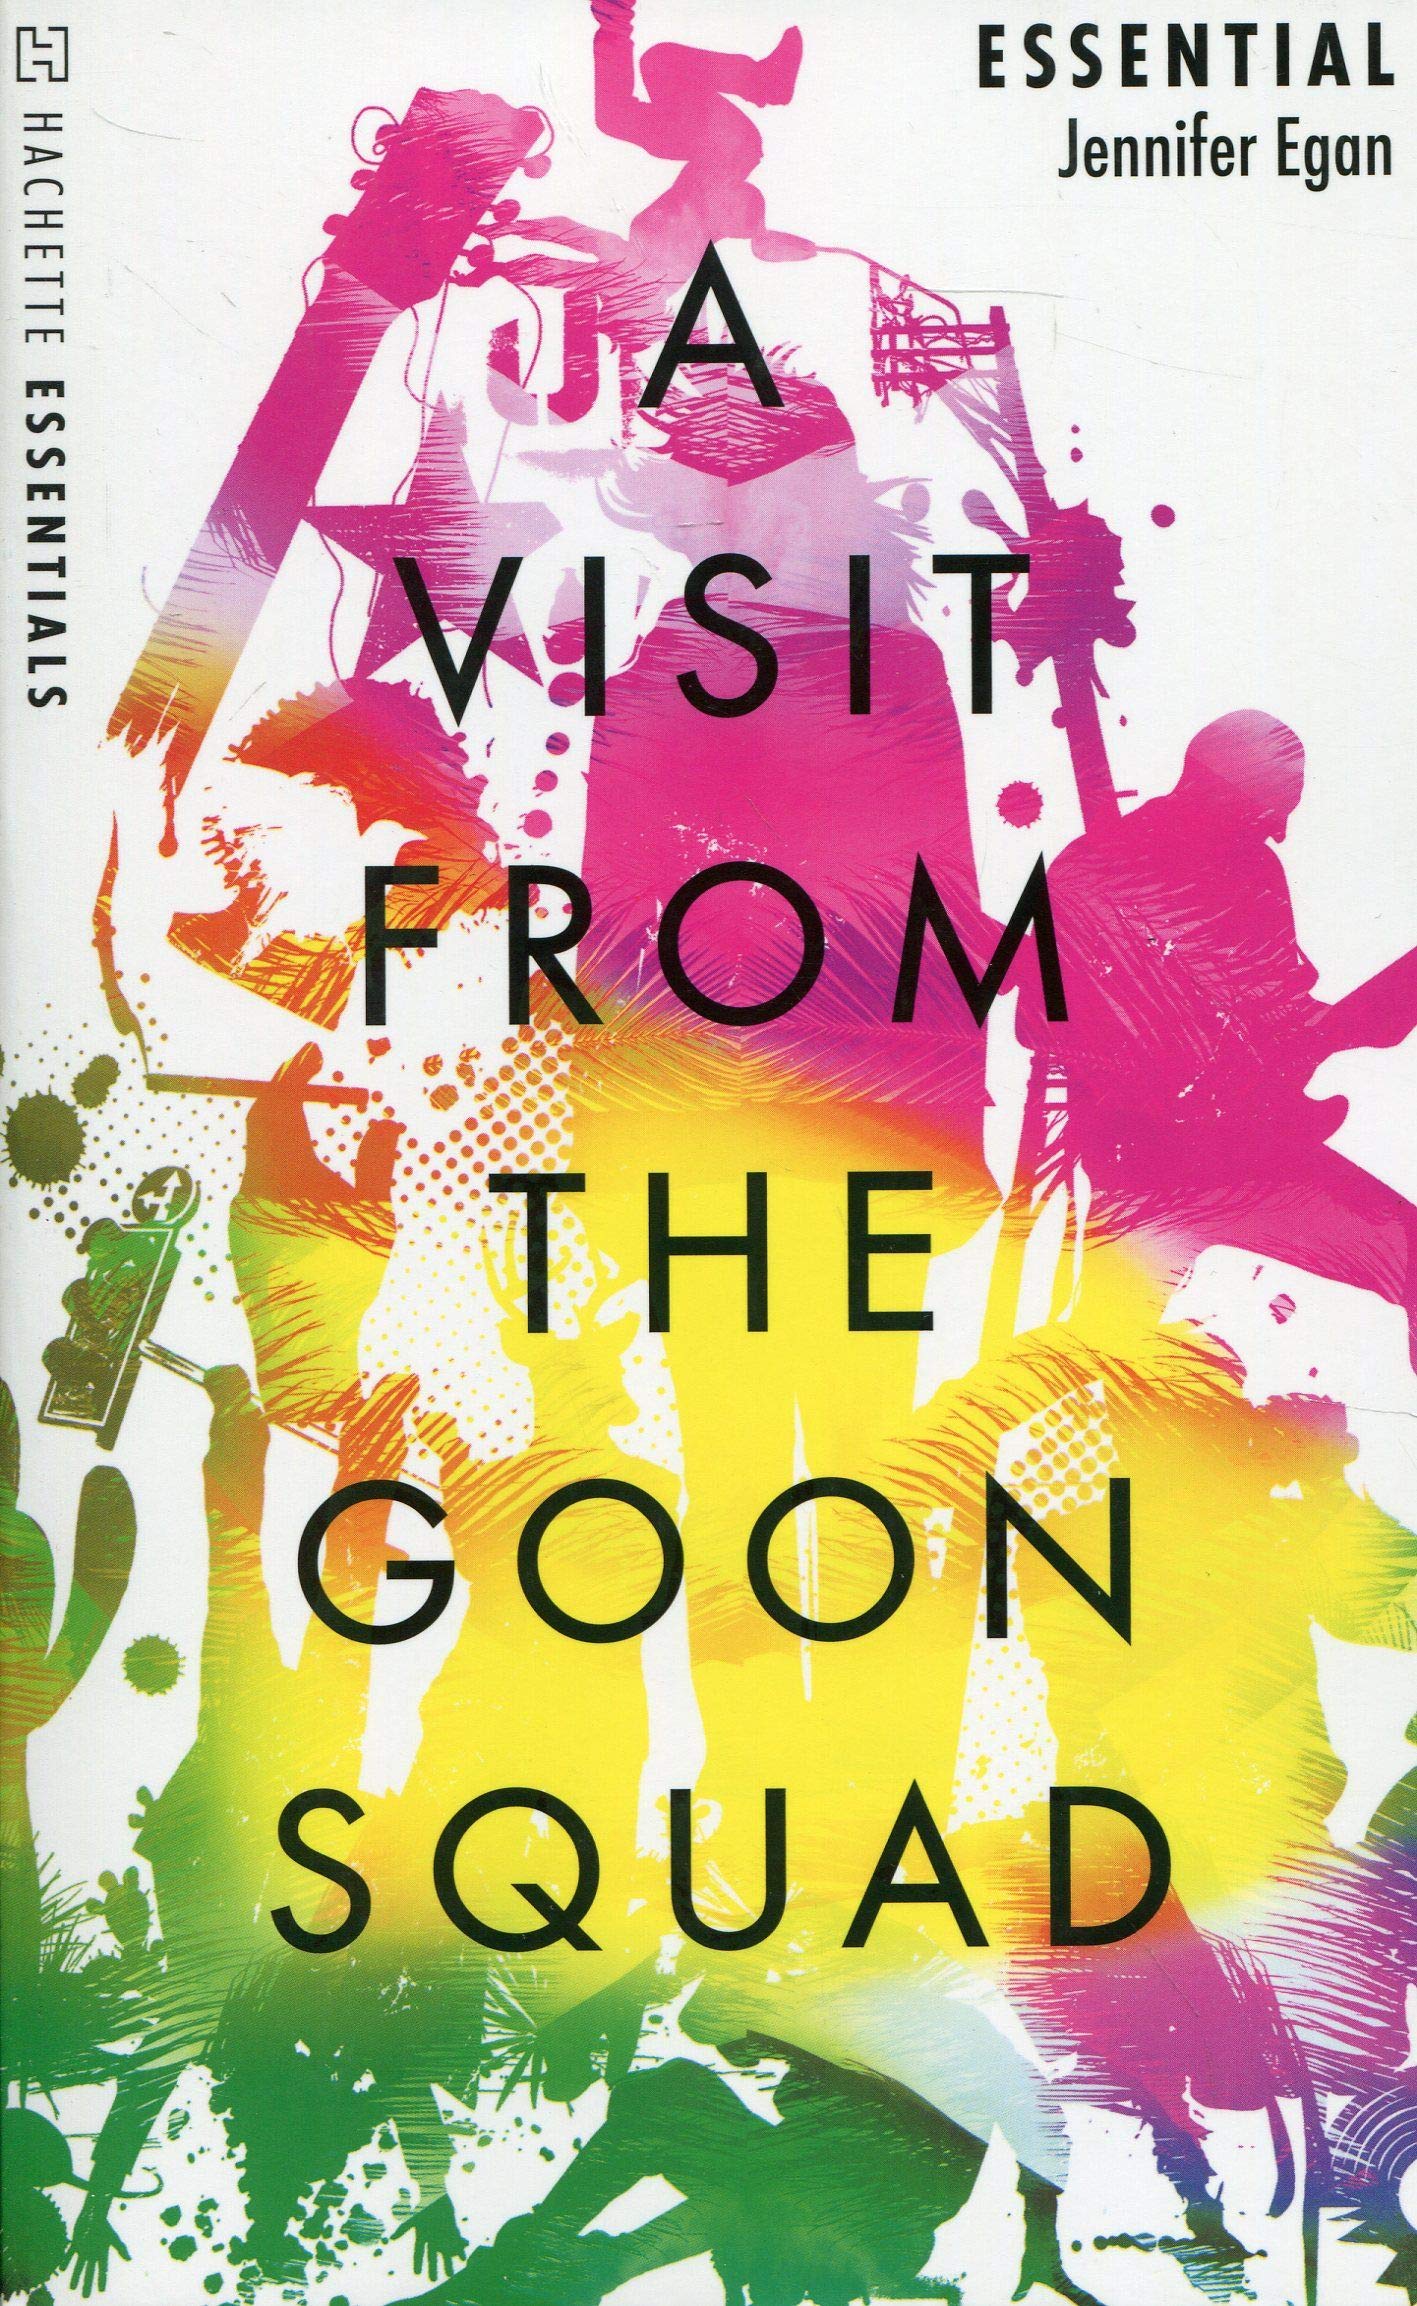 a visit from goon squad summary